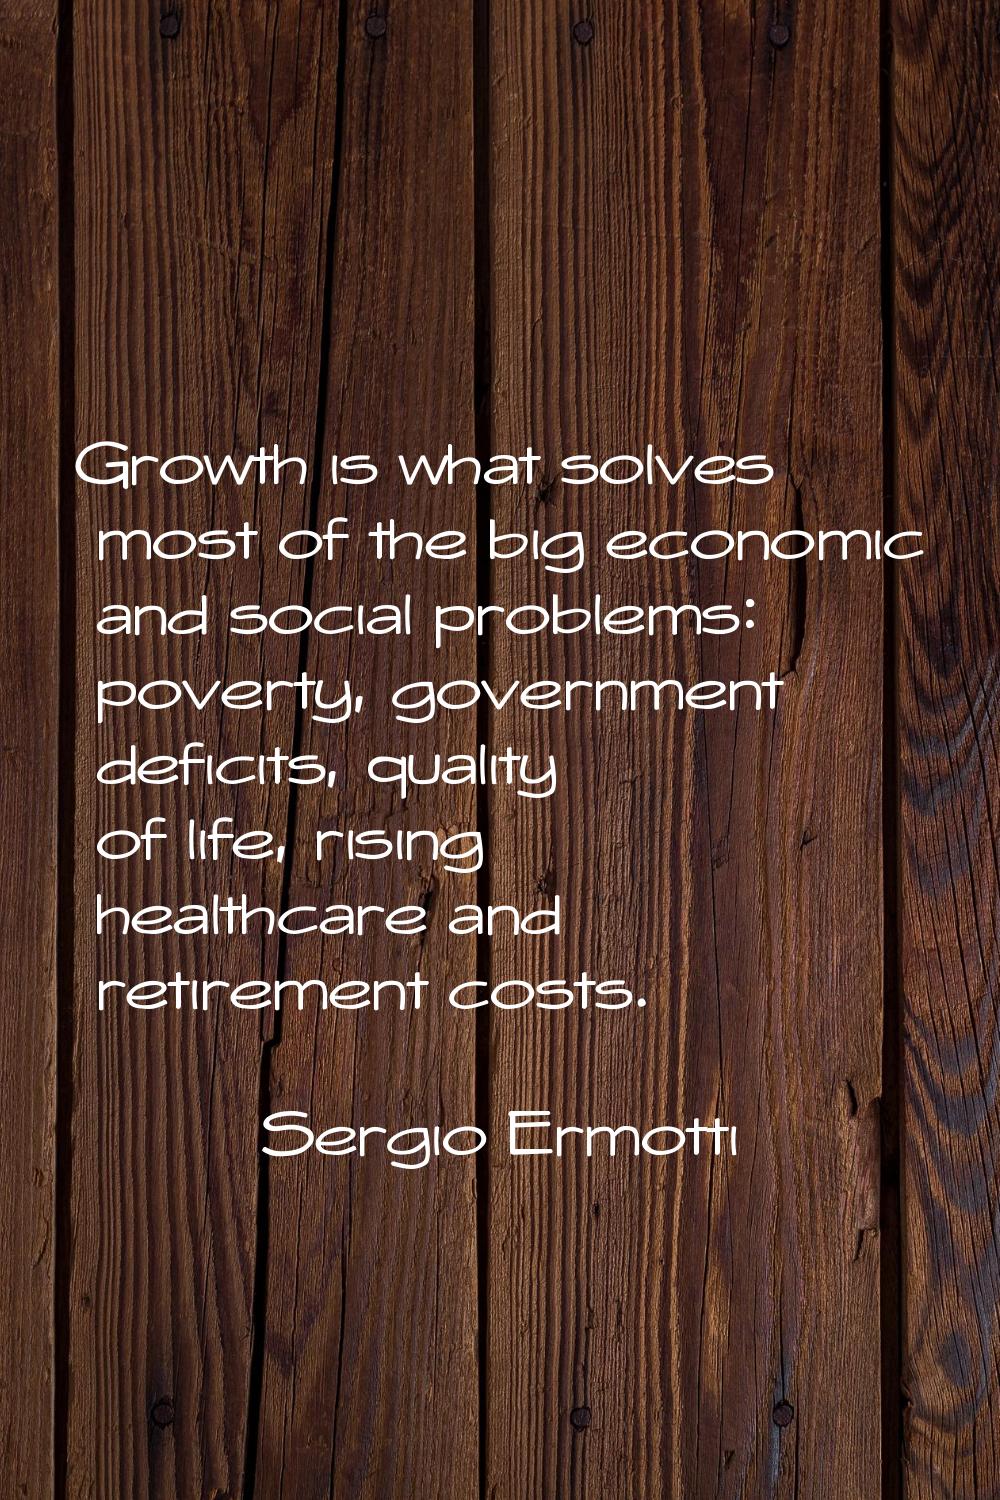 Growth is what solves most of the big economic and social problems: poverty, government deficits, q